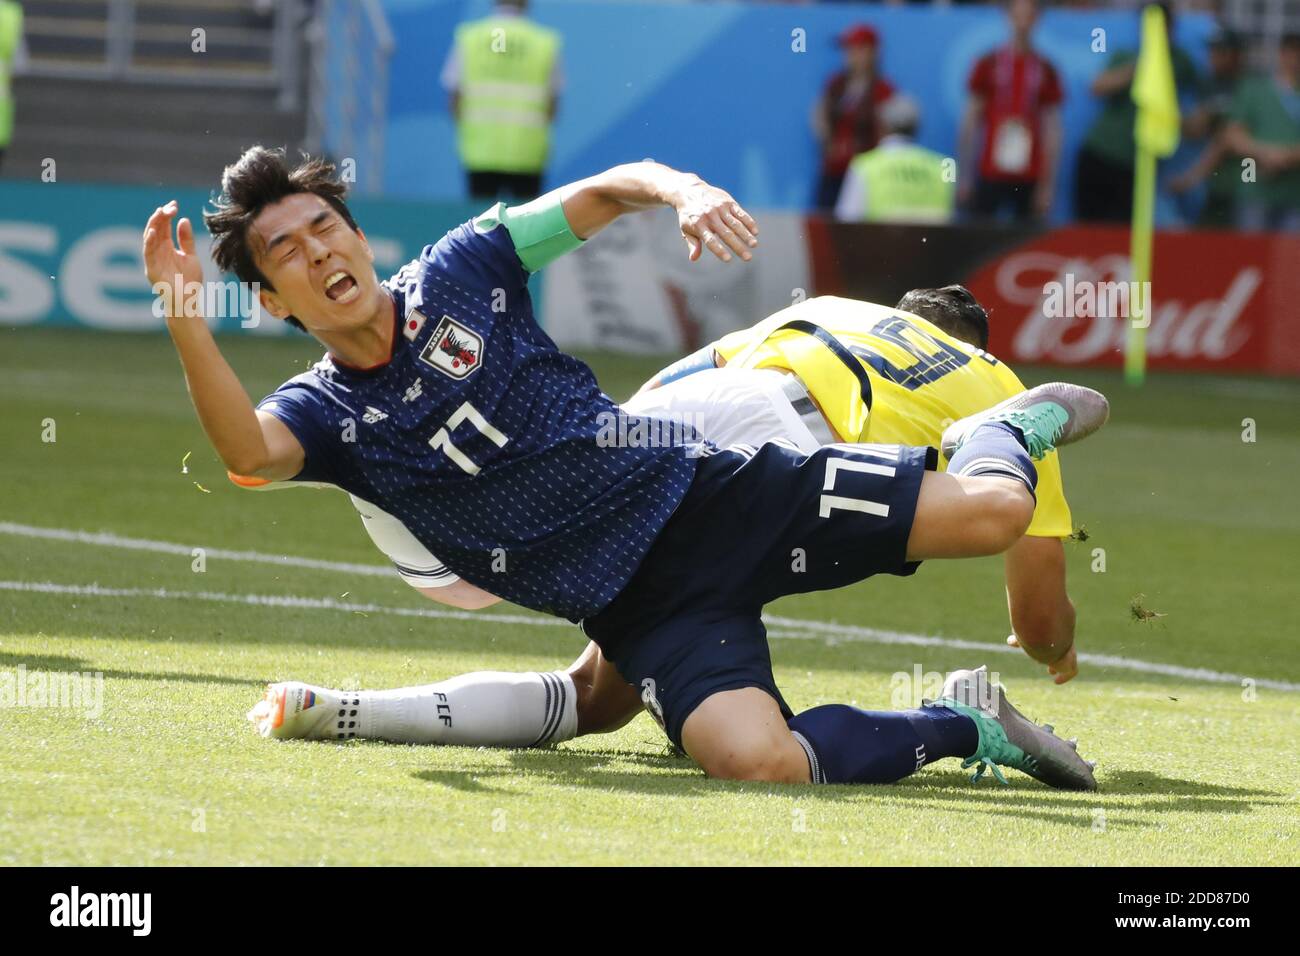 Colombia's Radamel Falcao battles Japan's Makoto Hasebe during the 2018 FIFA World Cup Russia game, Colombia vs Japan in Saransk Stadium, Saransk, Russia on June 19, 2018. Japan won 2-1. Photo by Henri Szwarc/ABACAPRESS.COM Stock Photo